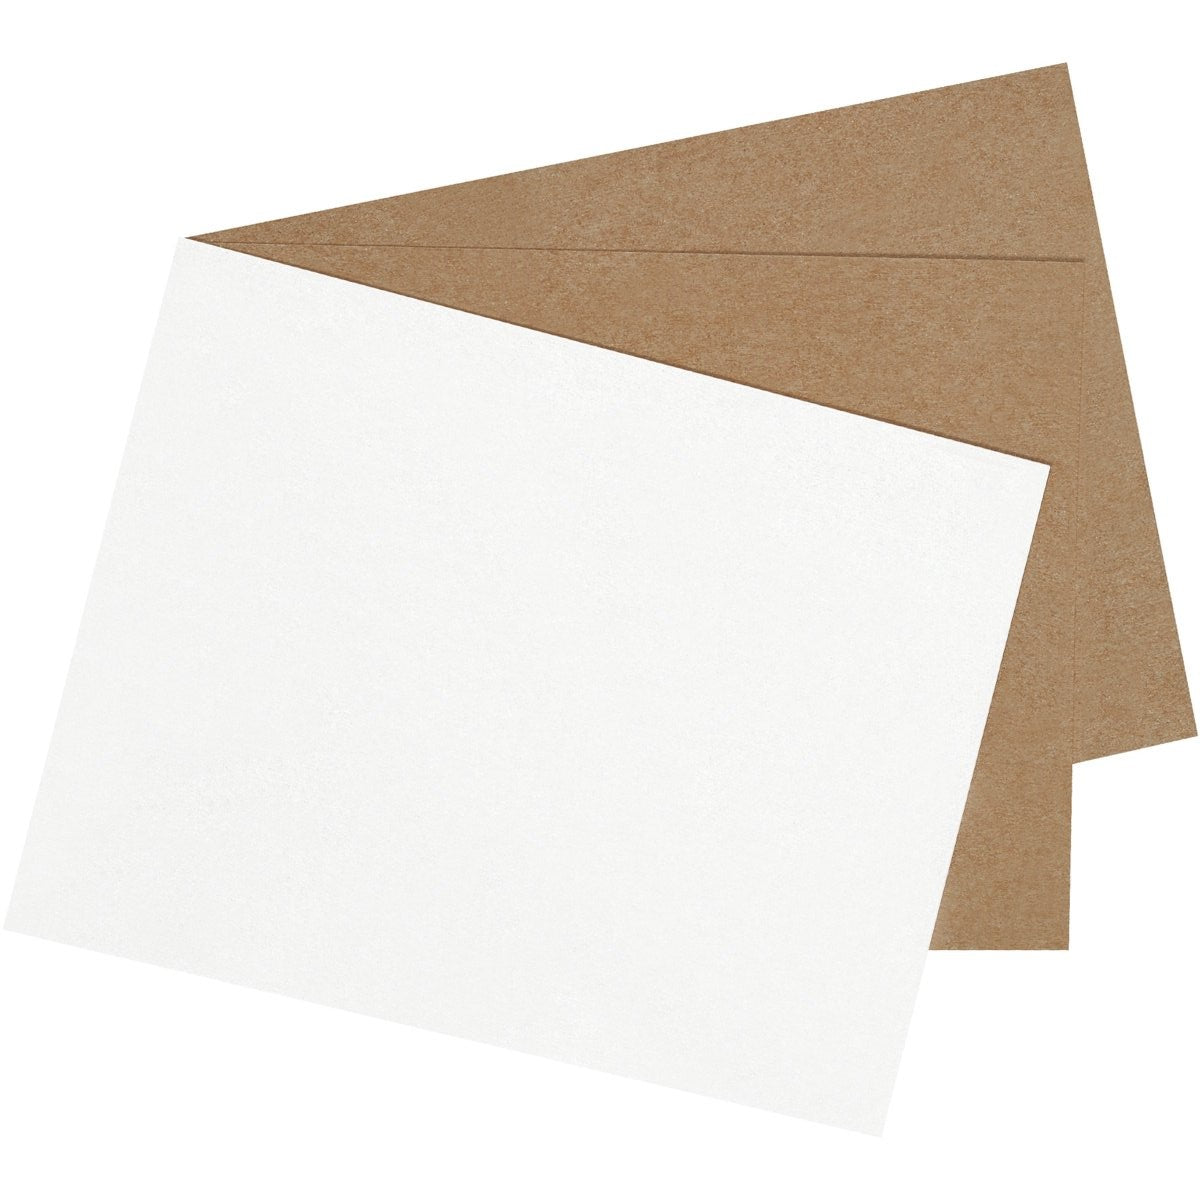 Chipboard 12x12 1X Heavy 50pt 25pcPk White 2 Side, 1 - Fry's Food